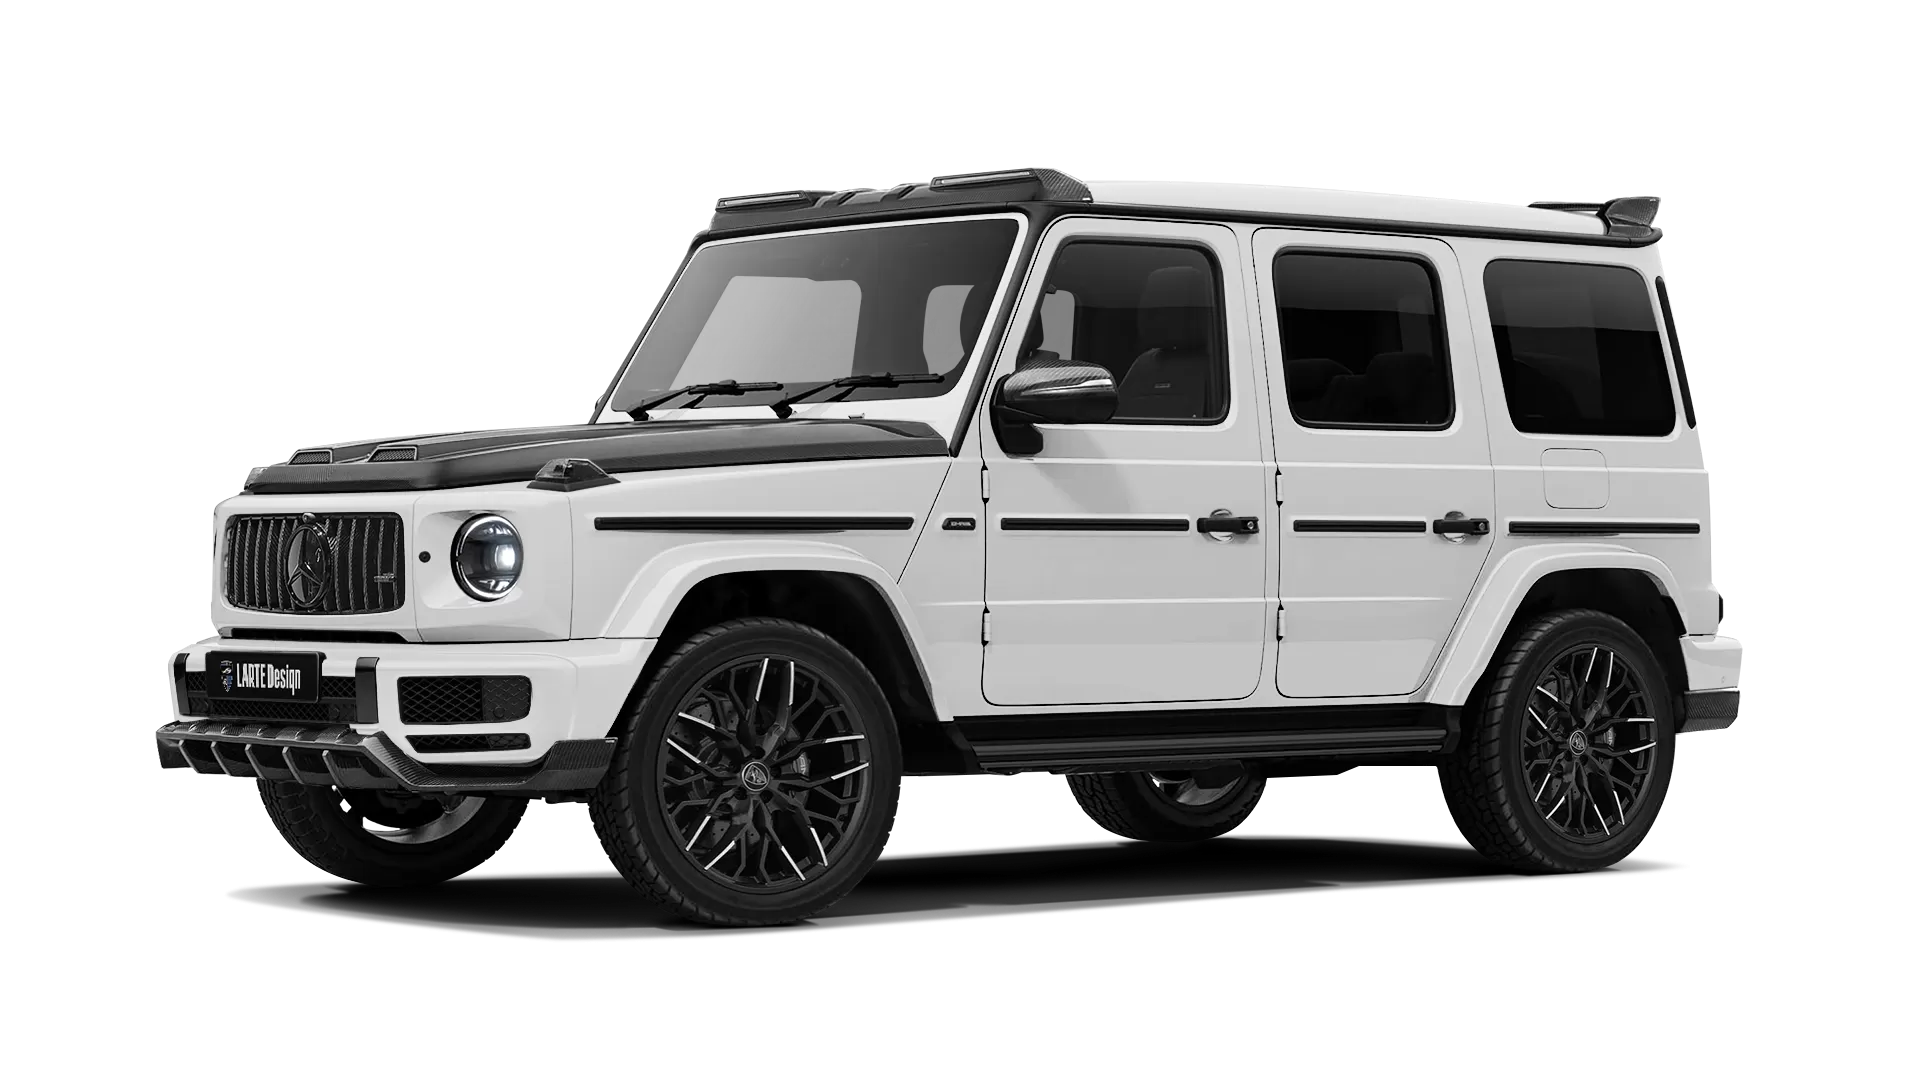 Mercedes G class W463 with carbon body kit: front view shown in Polar White